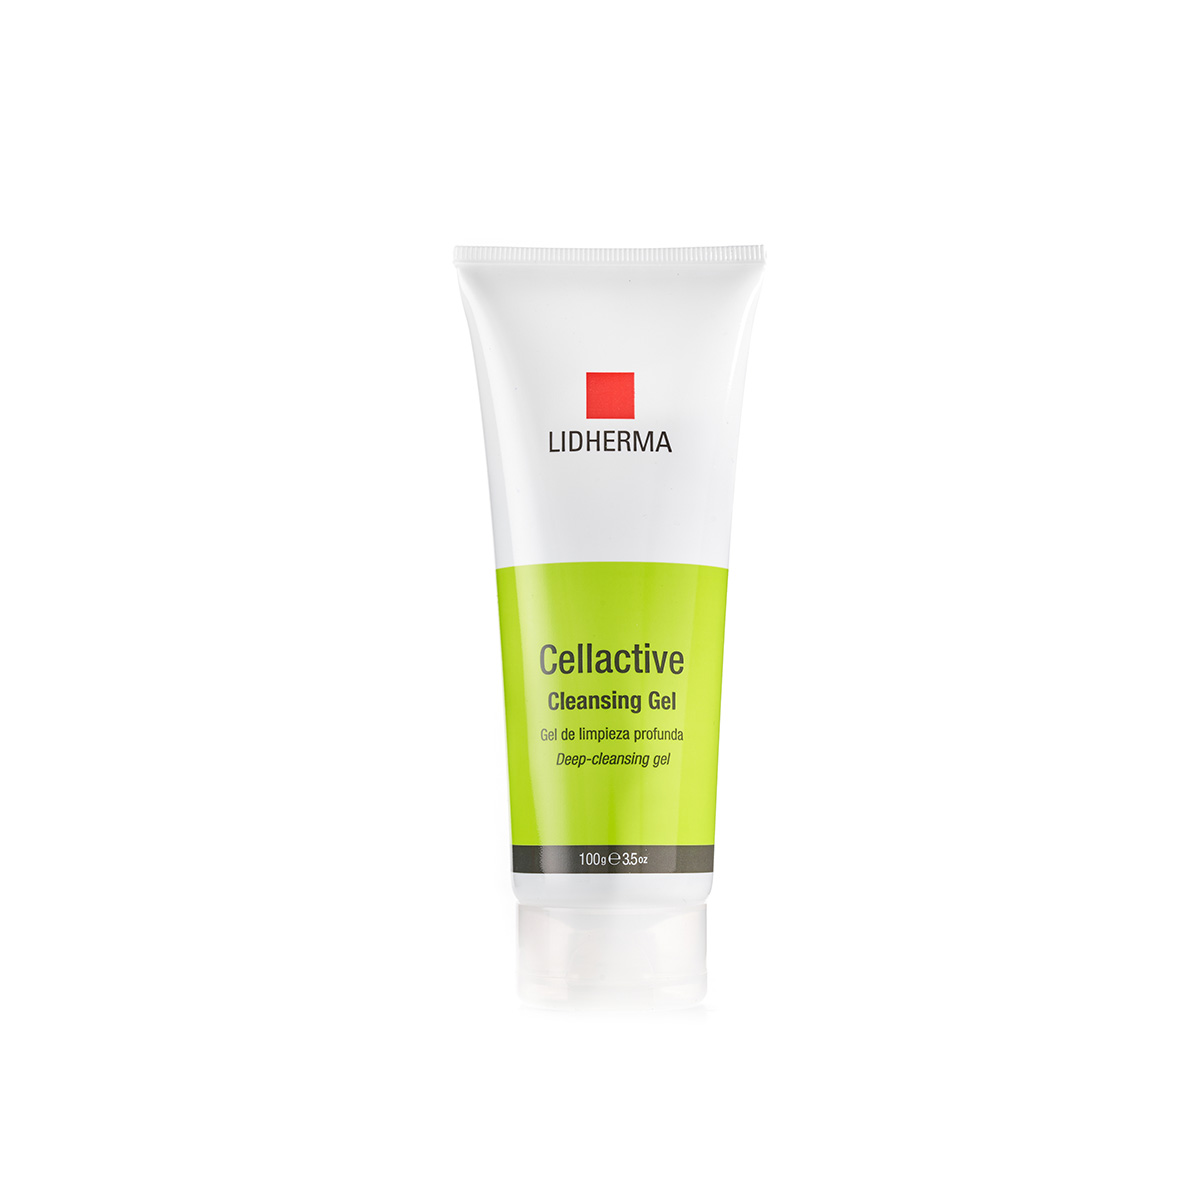 Cellactive Cleansing Gel